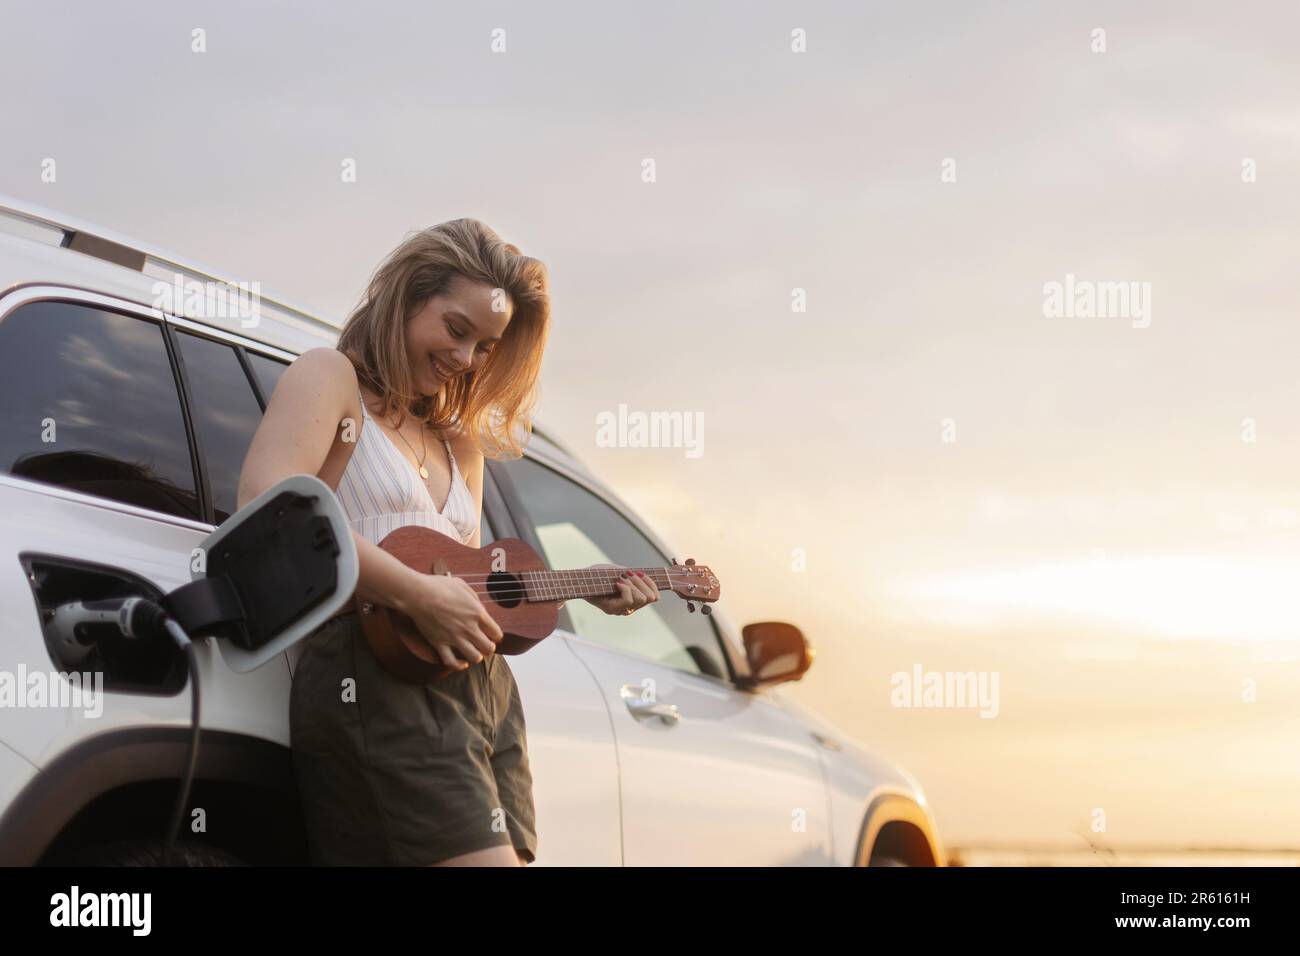 Portrait of young woman leaning on her car,playing on ukulele and enjoying summer time. Stock Photo